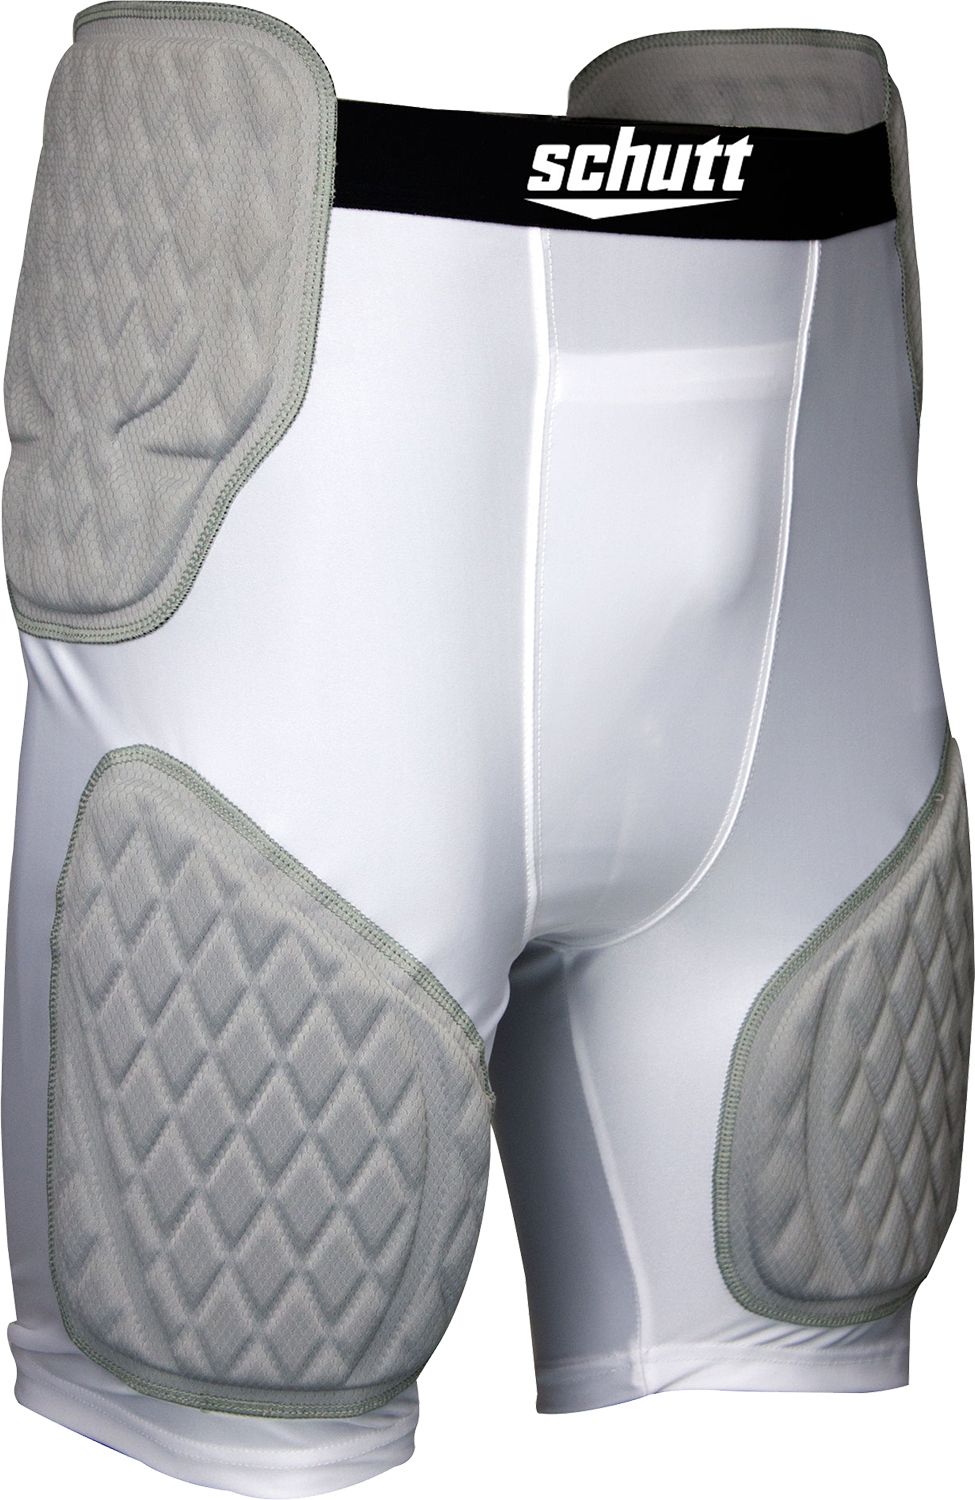 Schutt ProTech Varsity All-in-One Football Girdle Padded Compression Shorts  with Integrated Hip, Tailbone and Thigh Pads